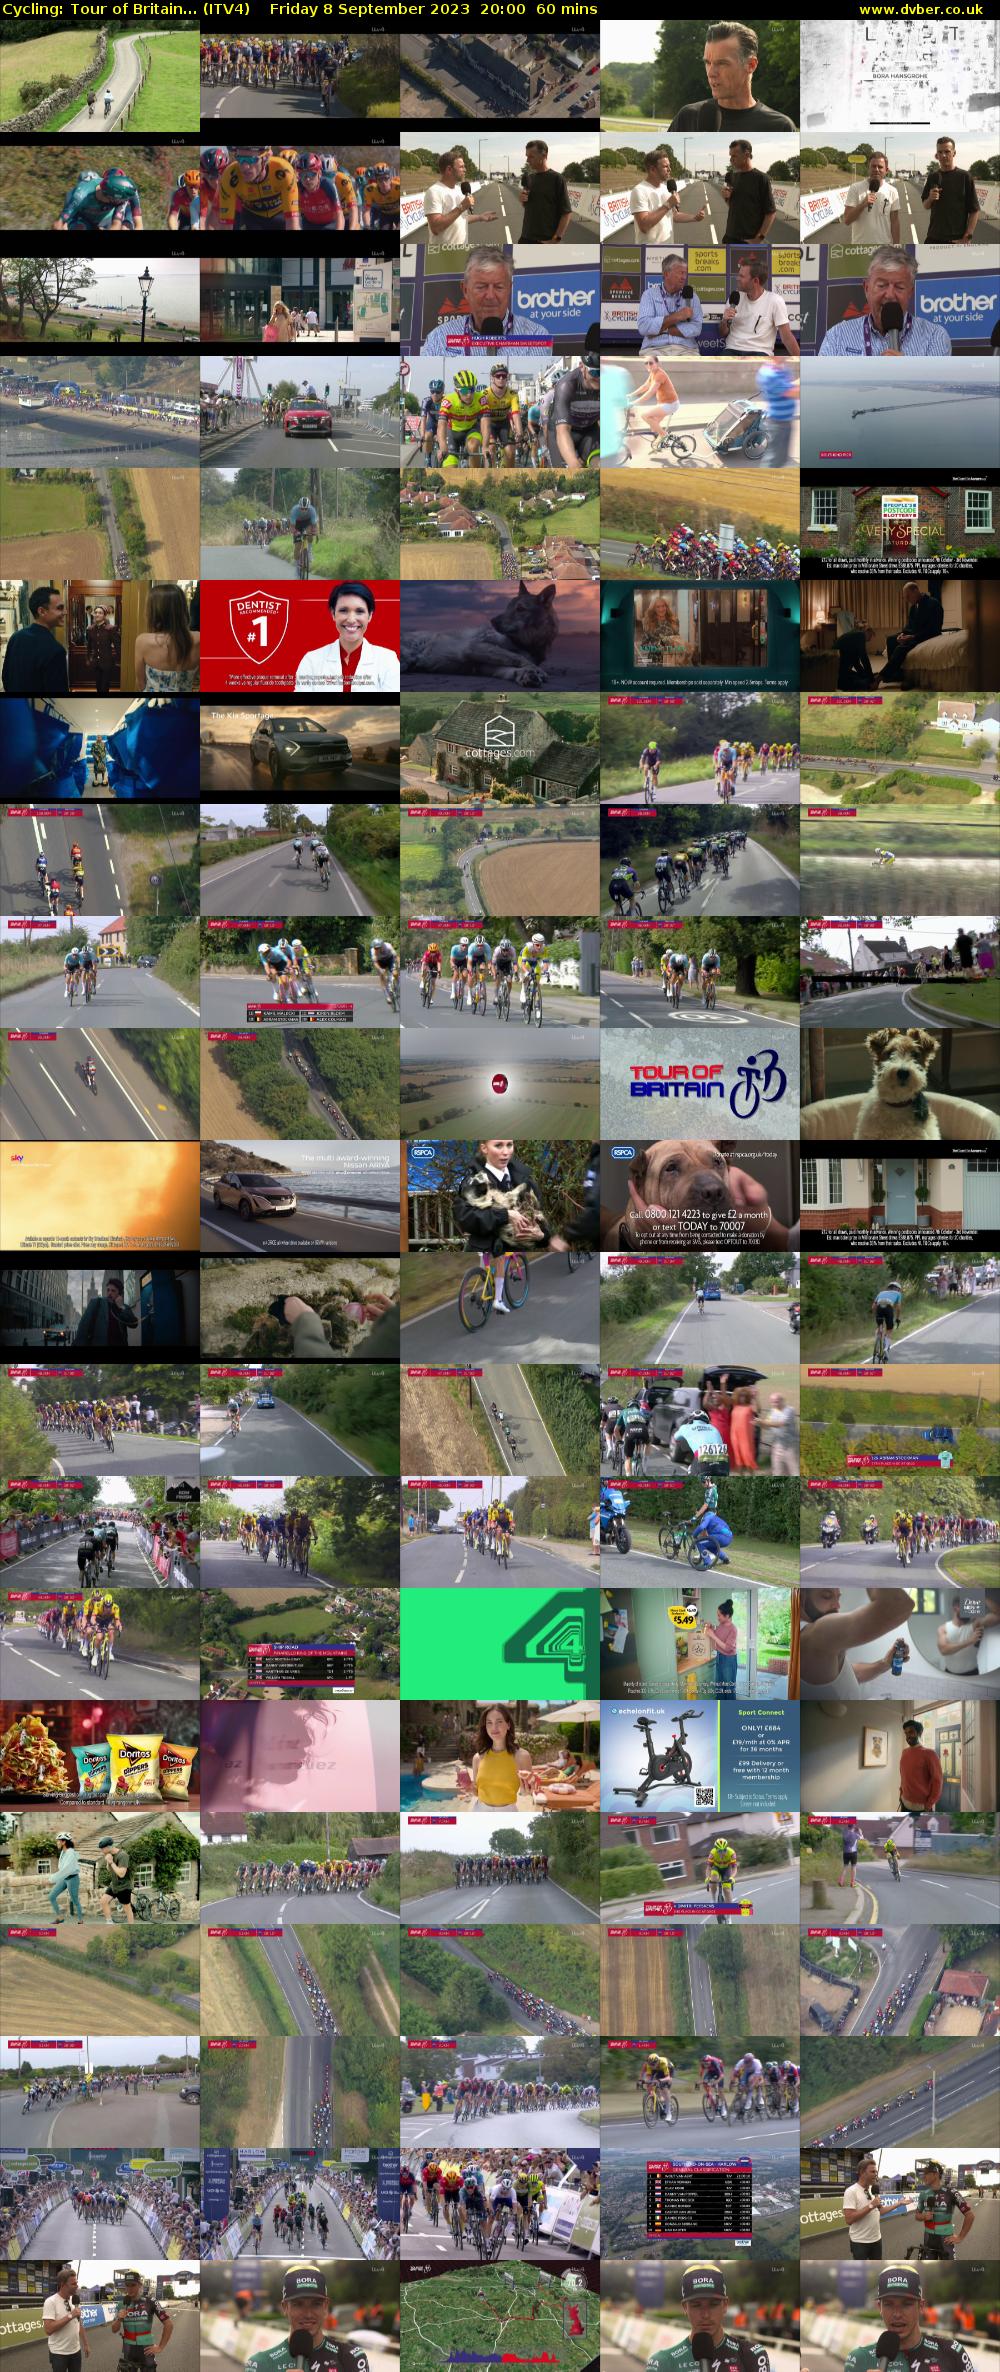 Cycling: Tour of Britain... (ITV4) Friday 8 September 2023 20:00 - 21:00